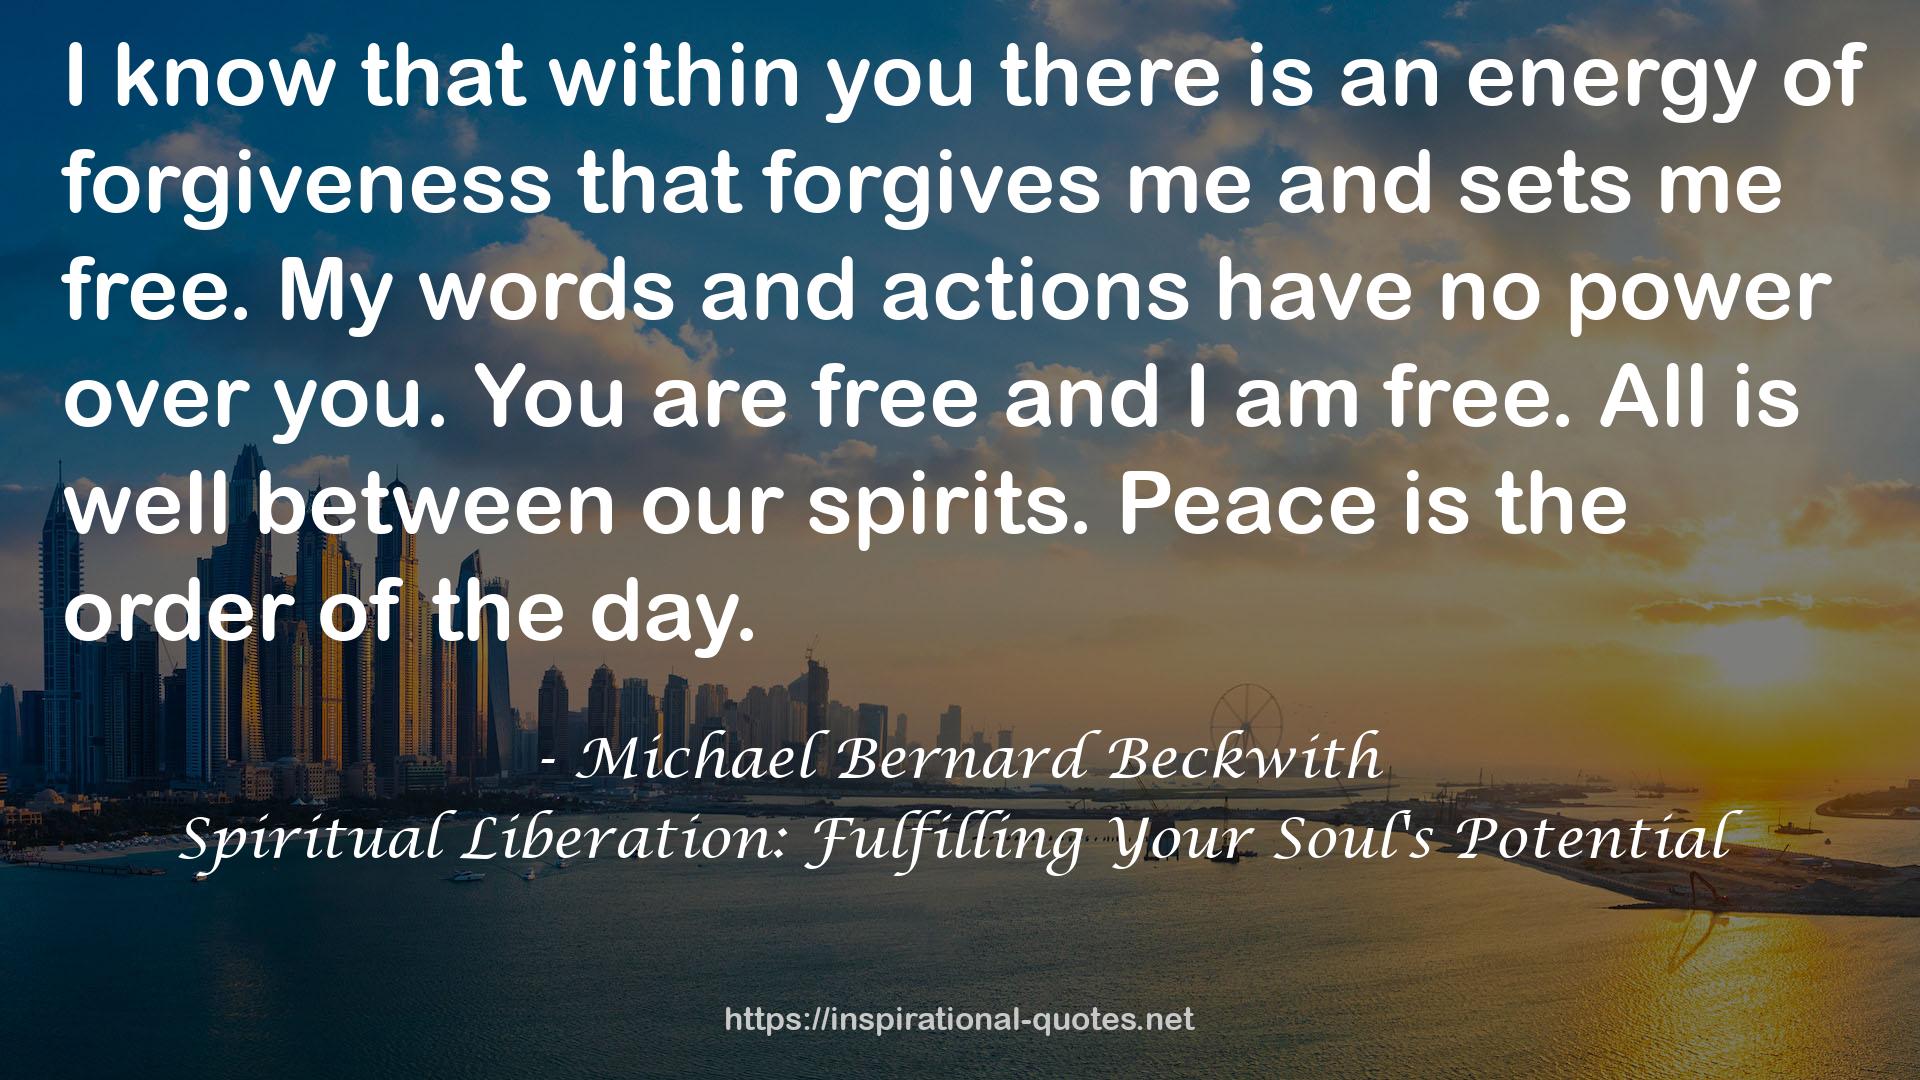 Spiritual Liberation: Fulfilling Your Soul's Potential QUOTES